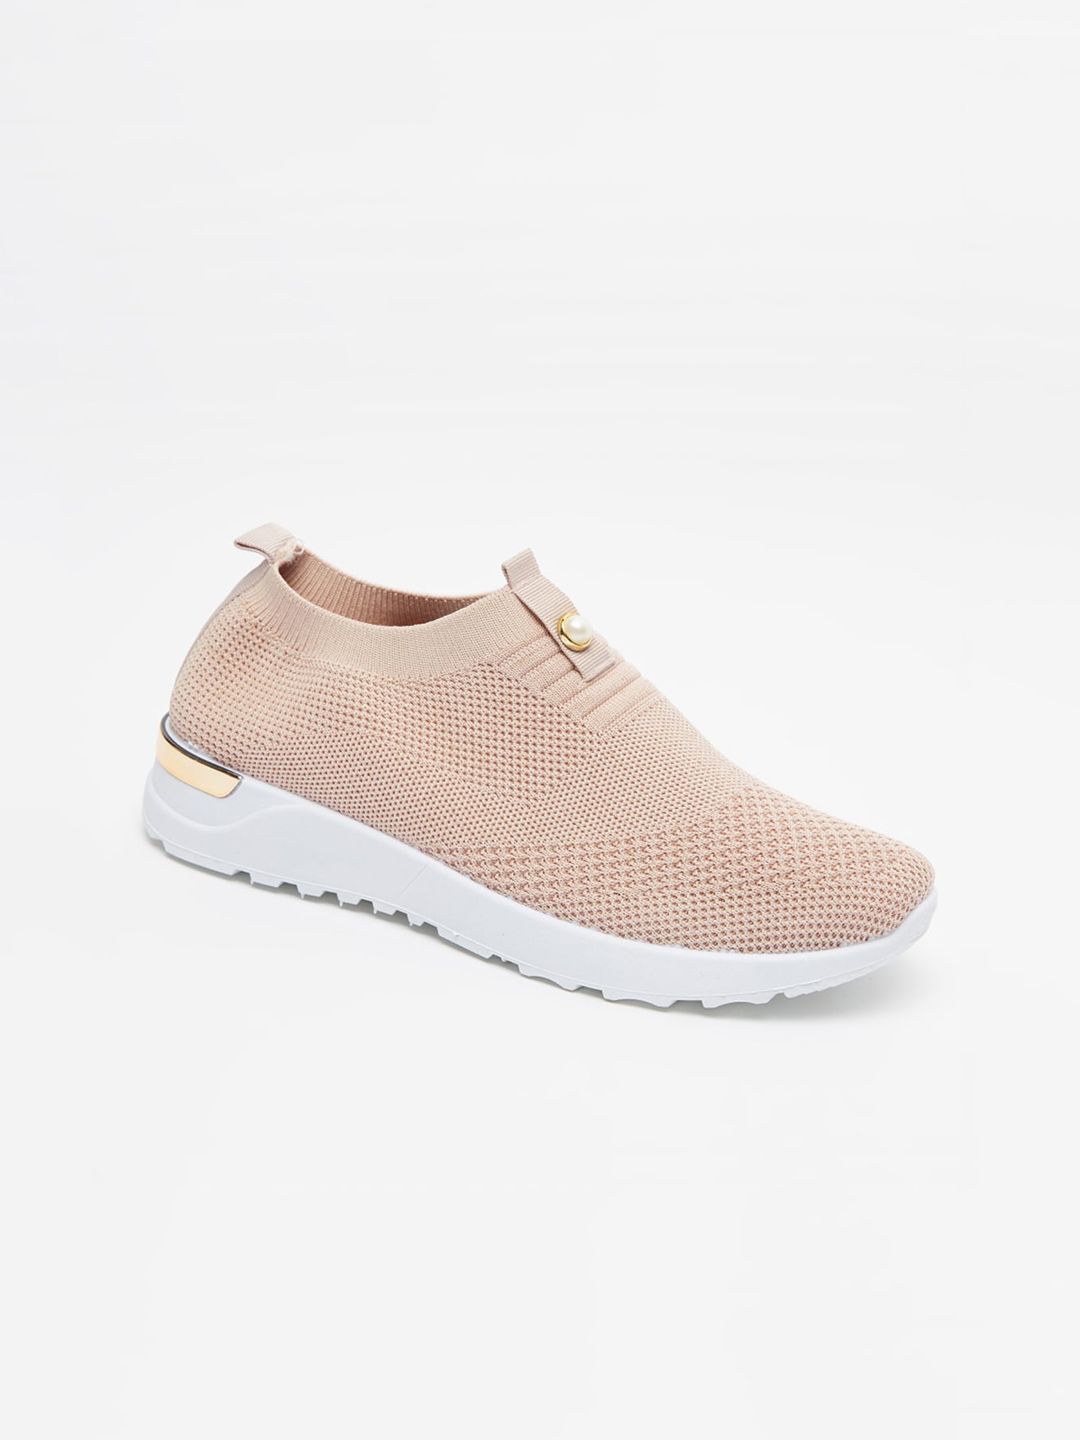 shoexpress Women Pink Woven Design Slip-on Sneakers Price in India